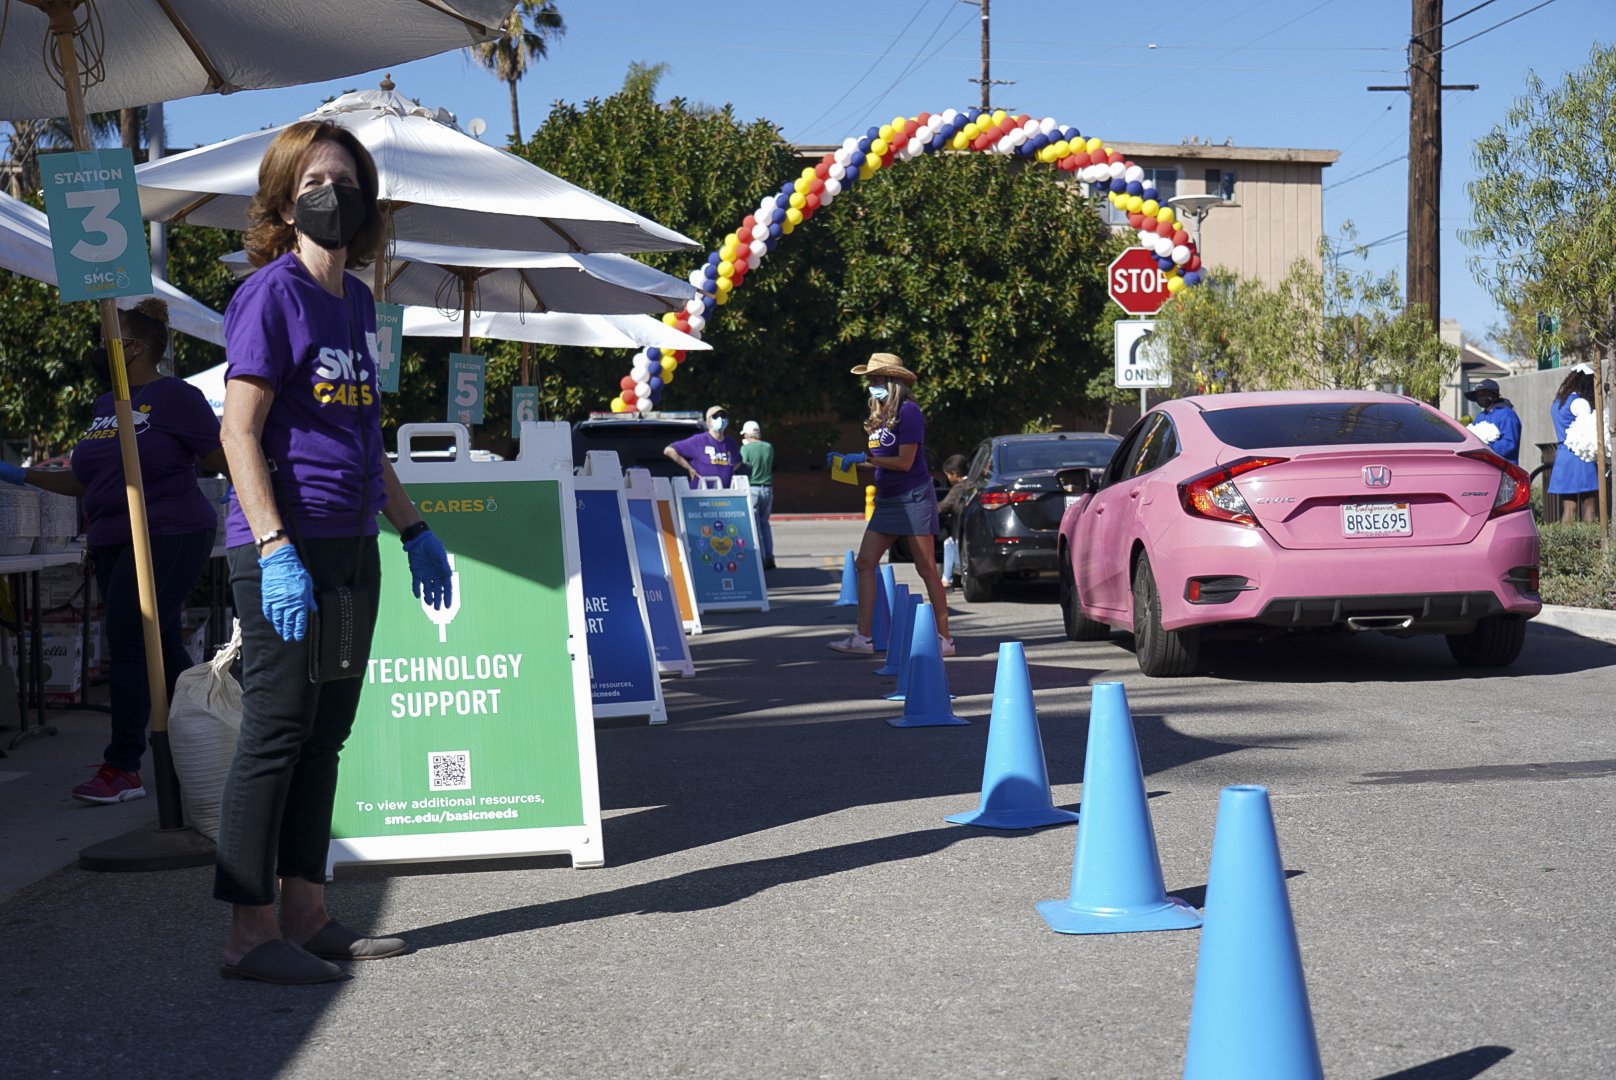  Volunteers prepare to receive student recipients during Santa Monica College's 3rd Giving Thanks(Giving) charity food distribution event Tuesday, Nov. 22 2022. The drive-thru market featured free care packages designed to ease the burden faced by fo